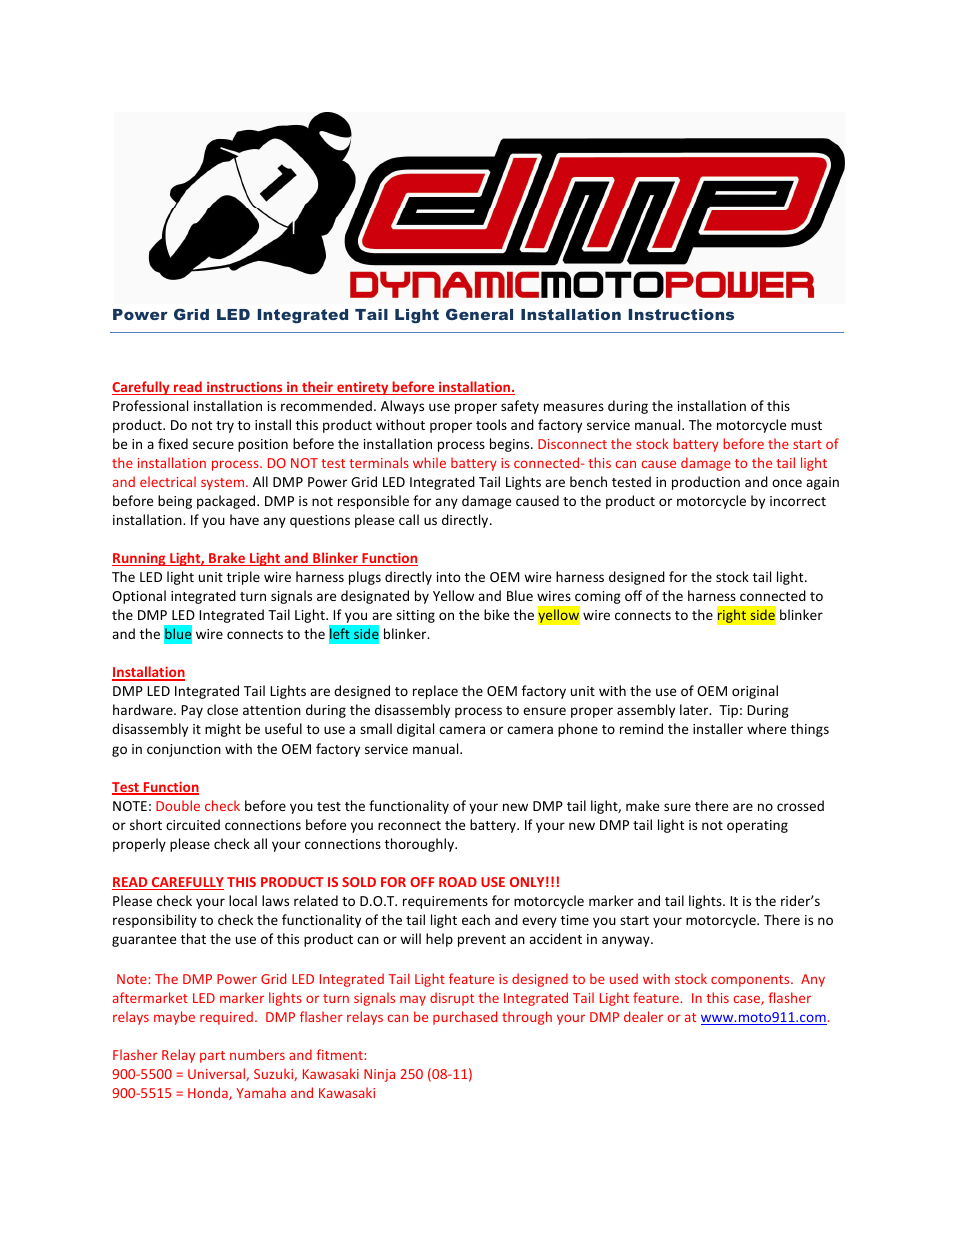 DMP Power Grid LED Tail Light General Instructions